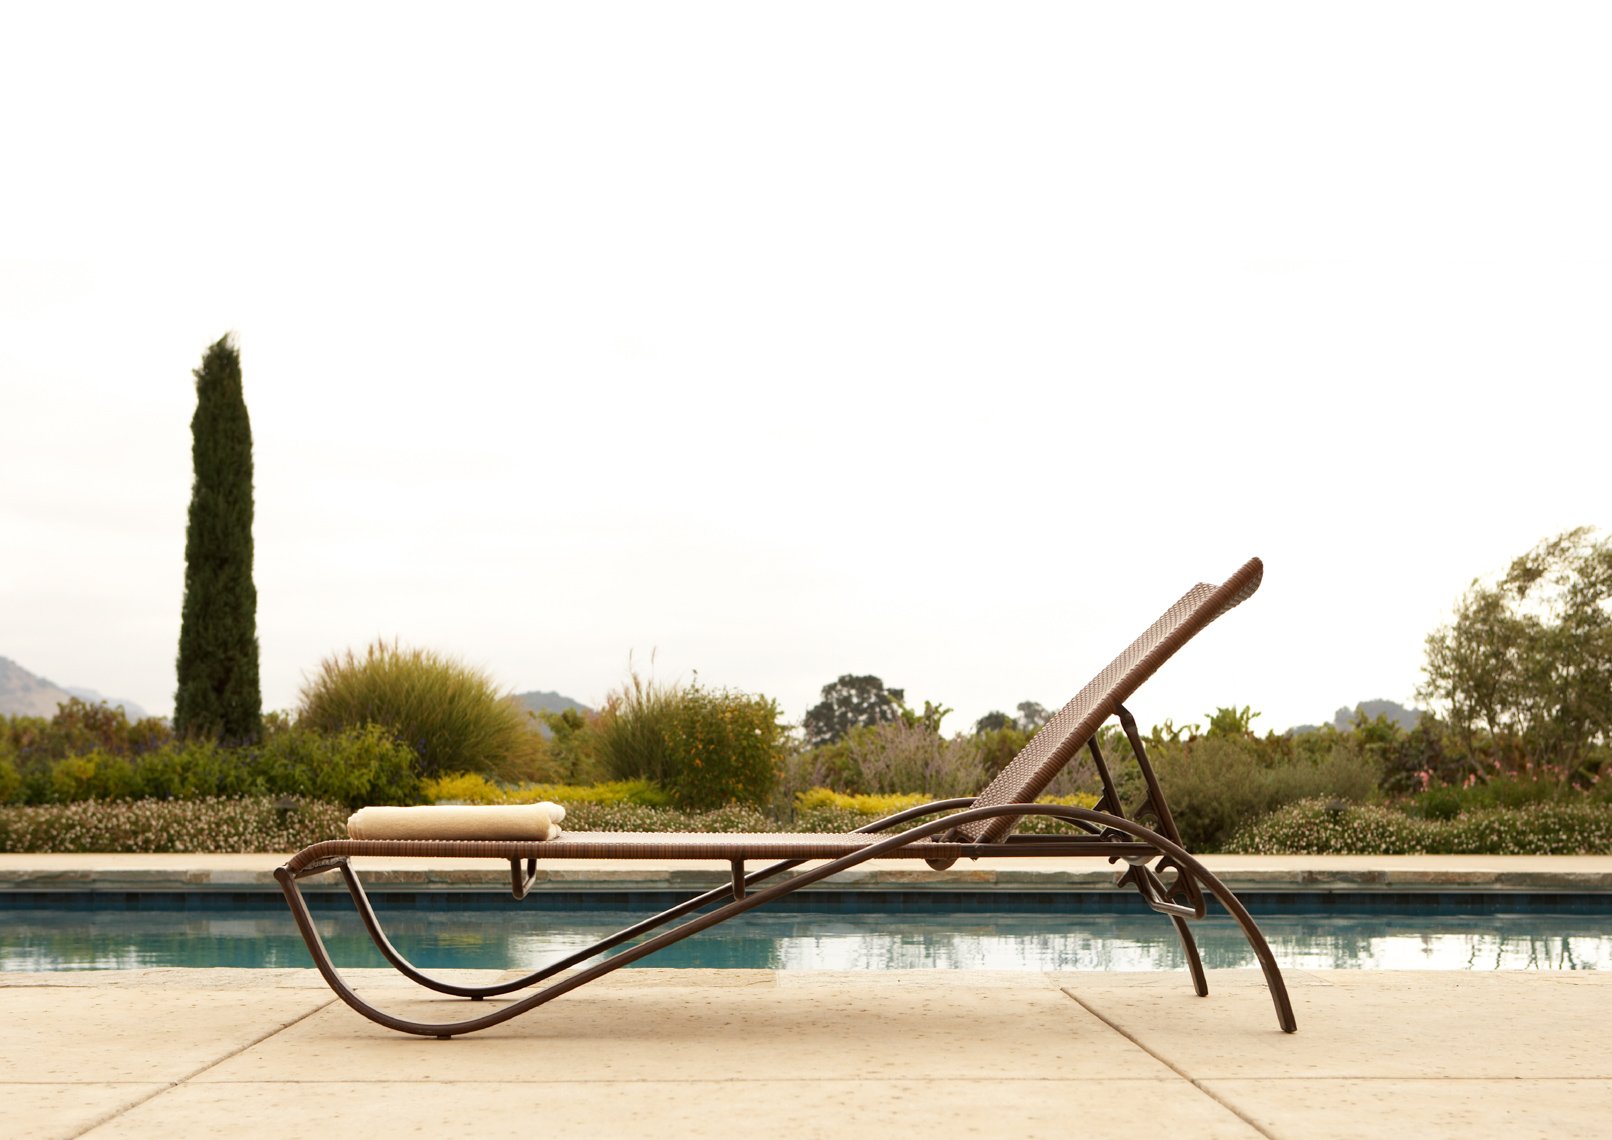 poolside sleek brown metal chaise with towel and garden scene San Francisco architectural photographer